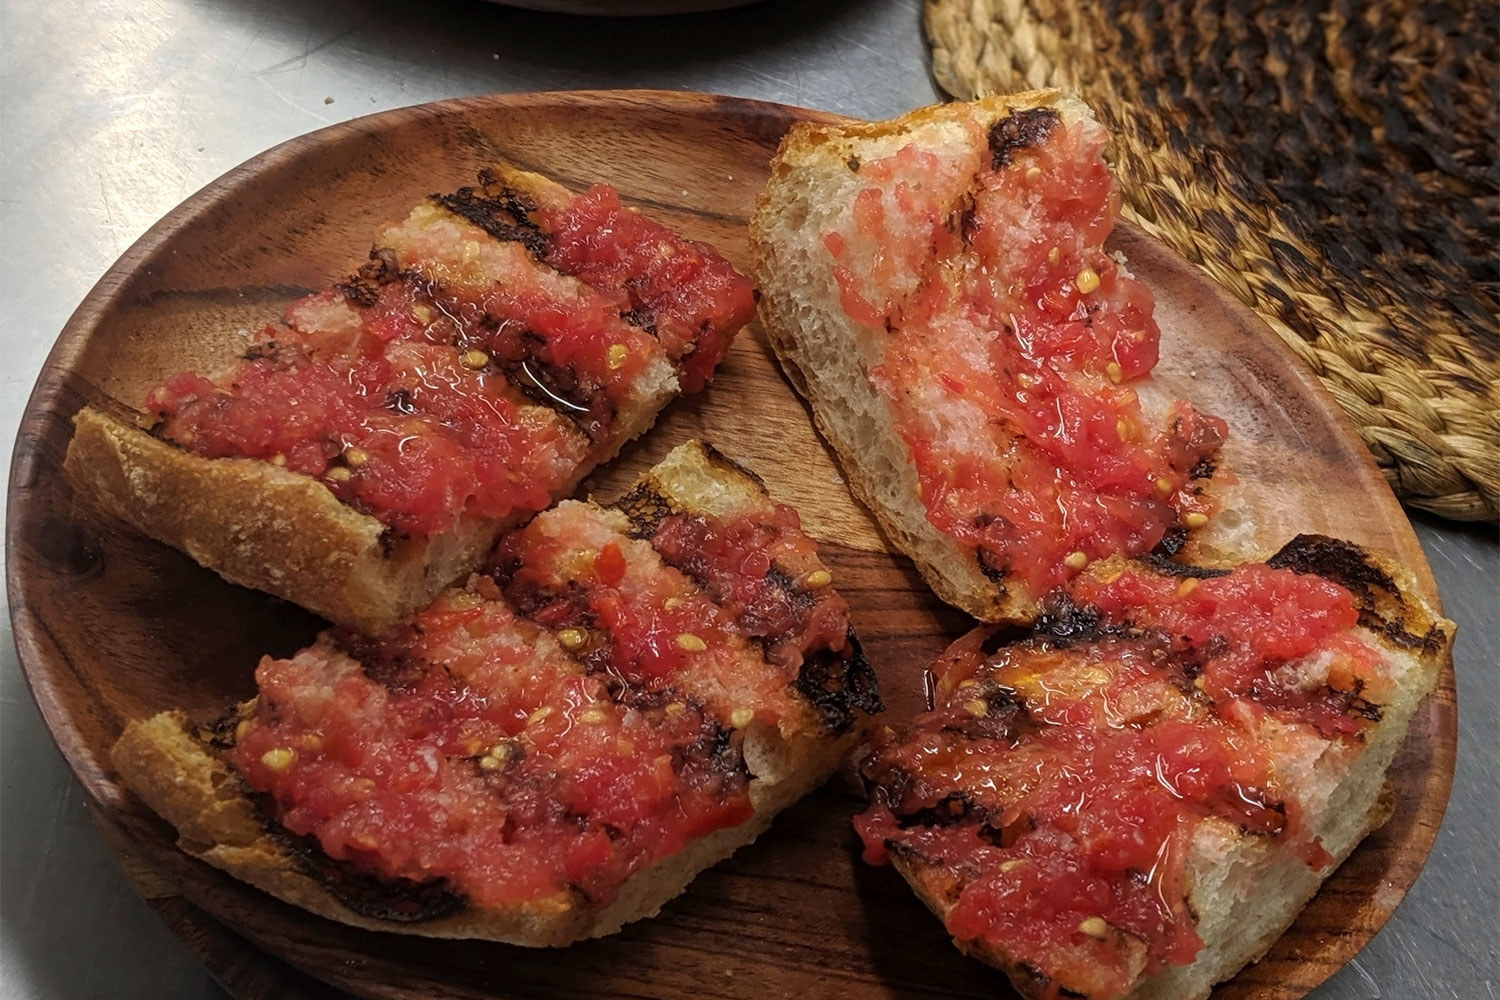 Spanish pan tomate, bread topped with grated tomatoes.